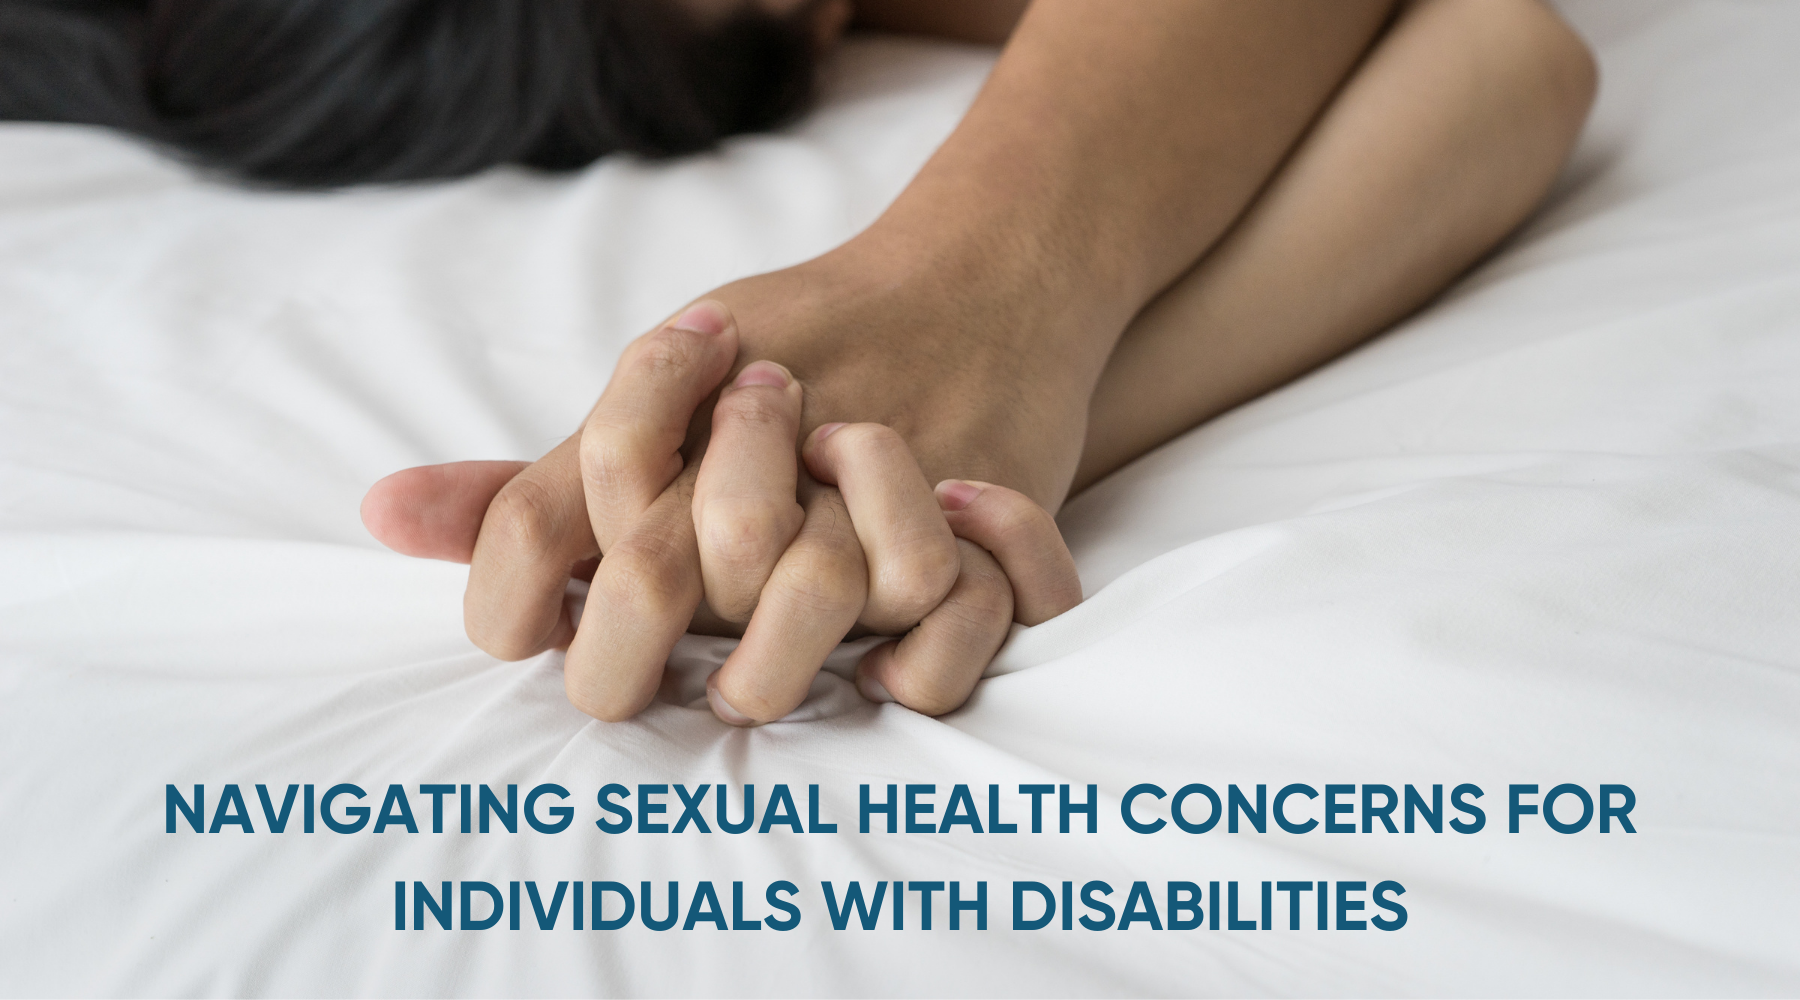 NAVIGATING SEXUAL HEALTH CONCERNS FOR INDIVIDUALS WITH DISABILITIES